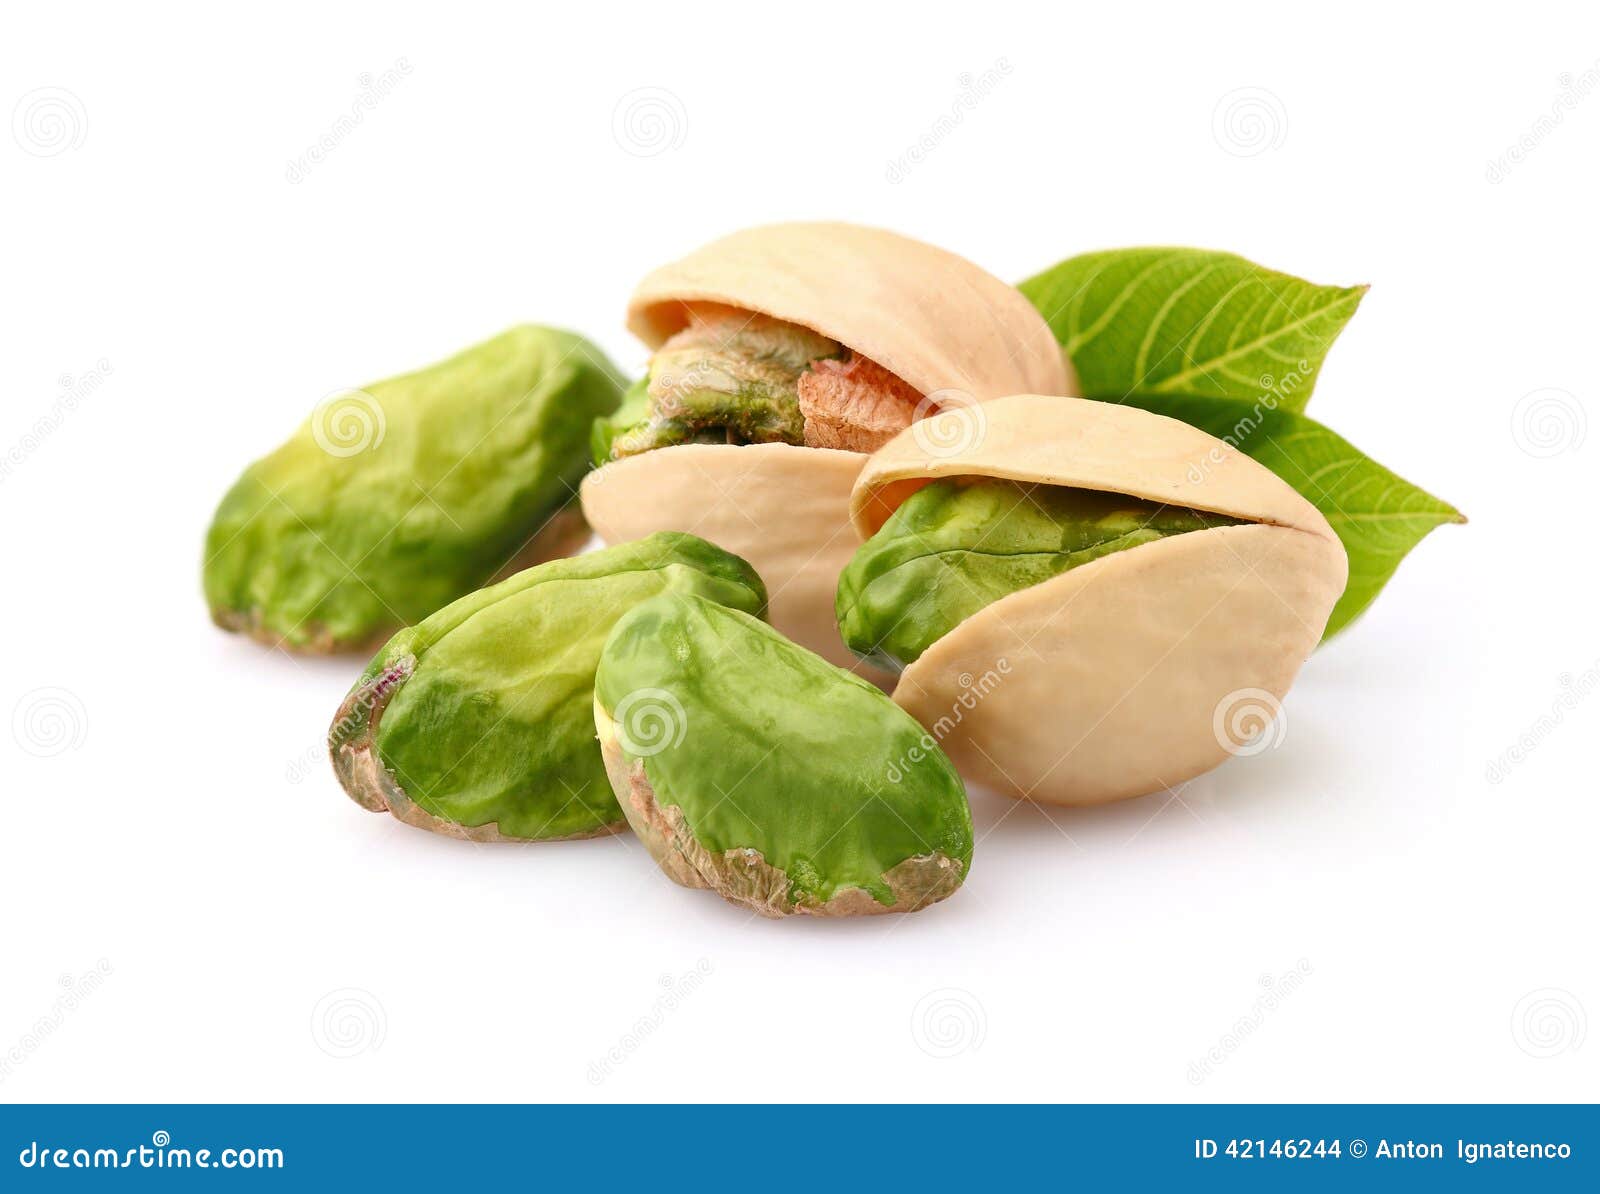 pistachio with leaves